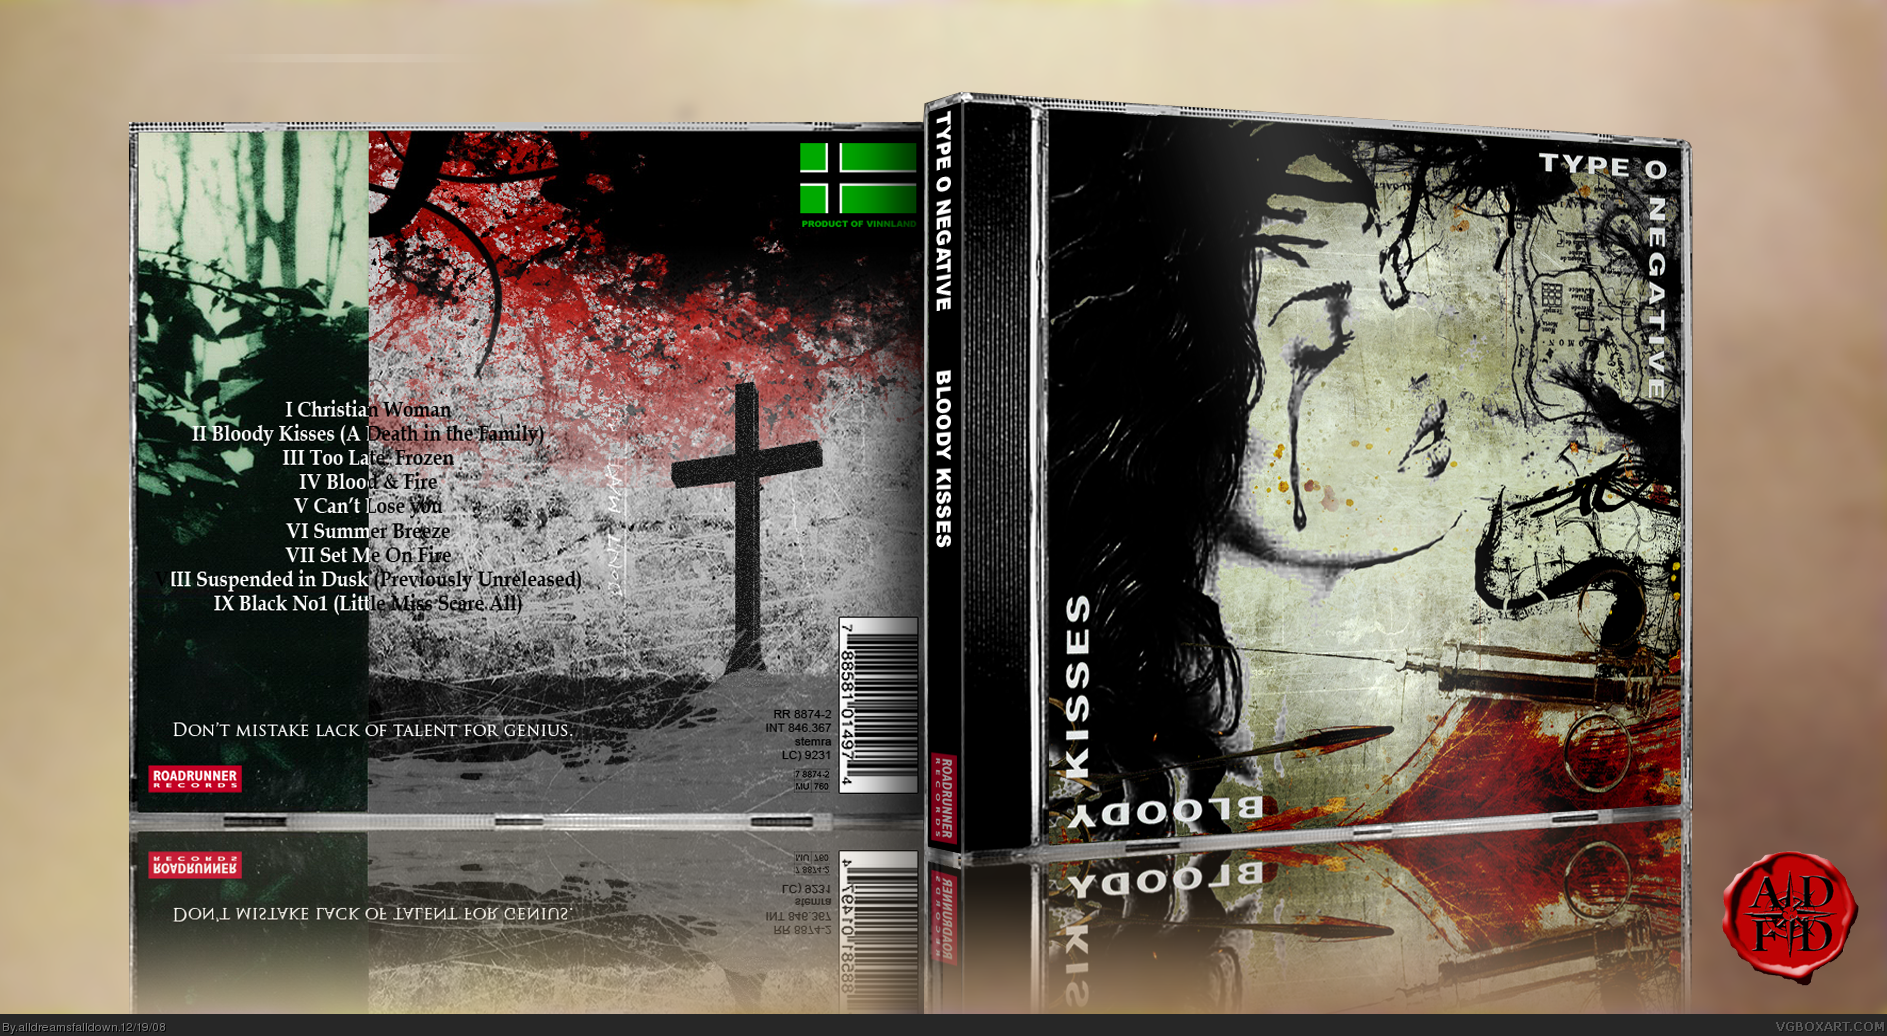 Type O Negative - Bloody Kisses box cover